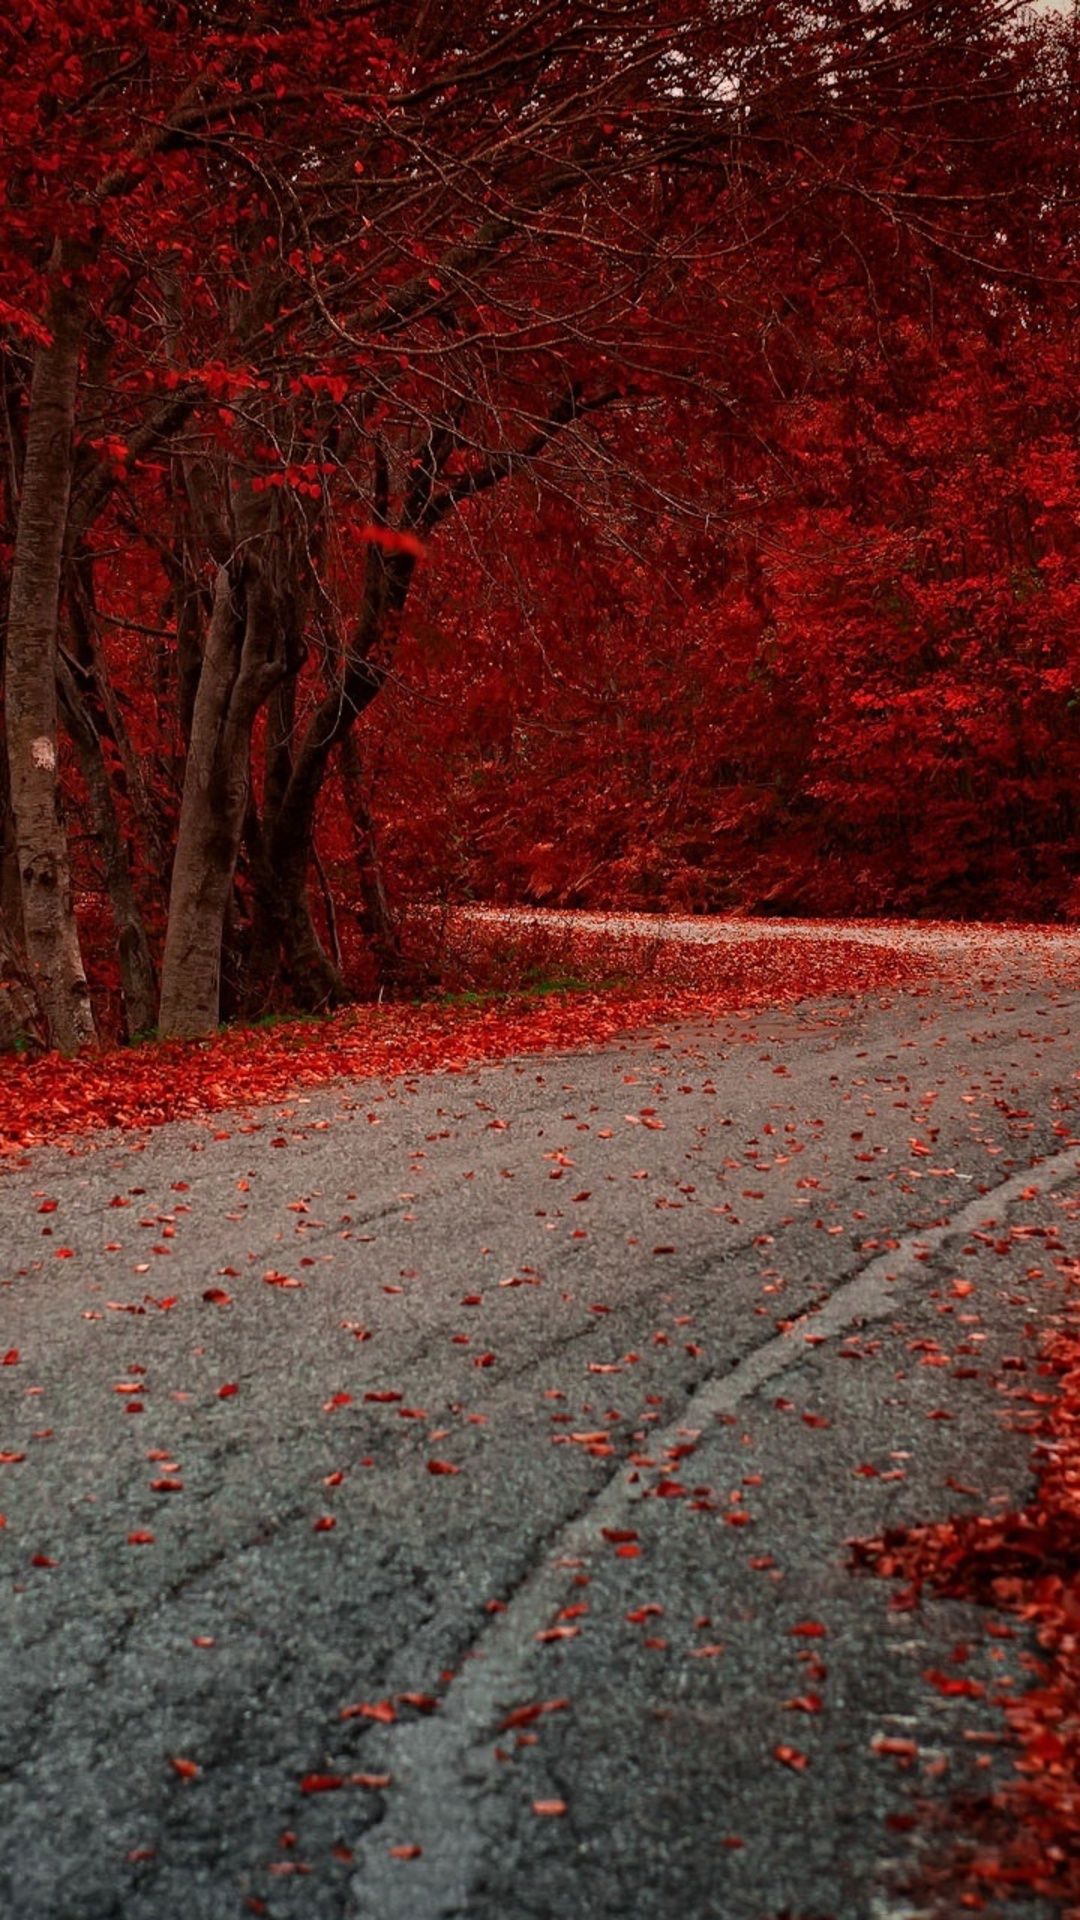 Red Leaves On Road Autumn Season iPhone 6s, 6 Plus, Pixel xl , One Plus 3t, 5 HD 4k Wallpaper, Image, Background, Photo and Picture